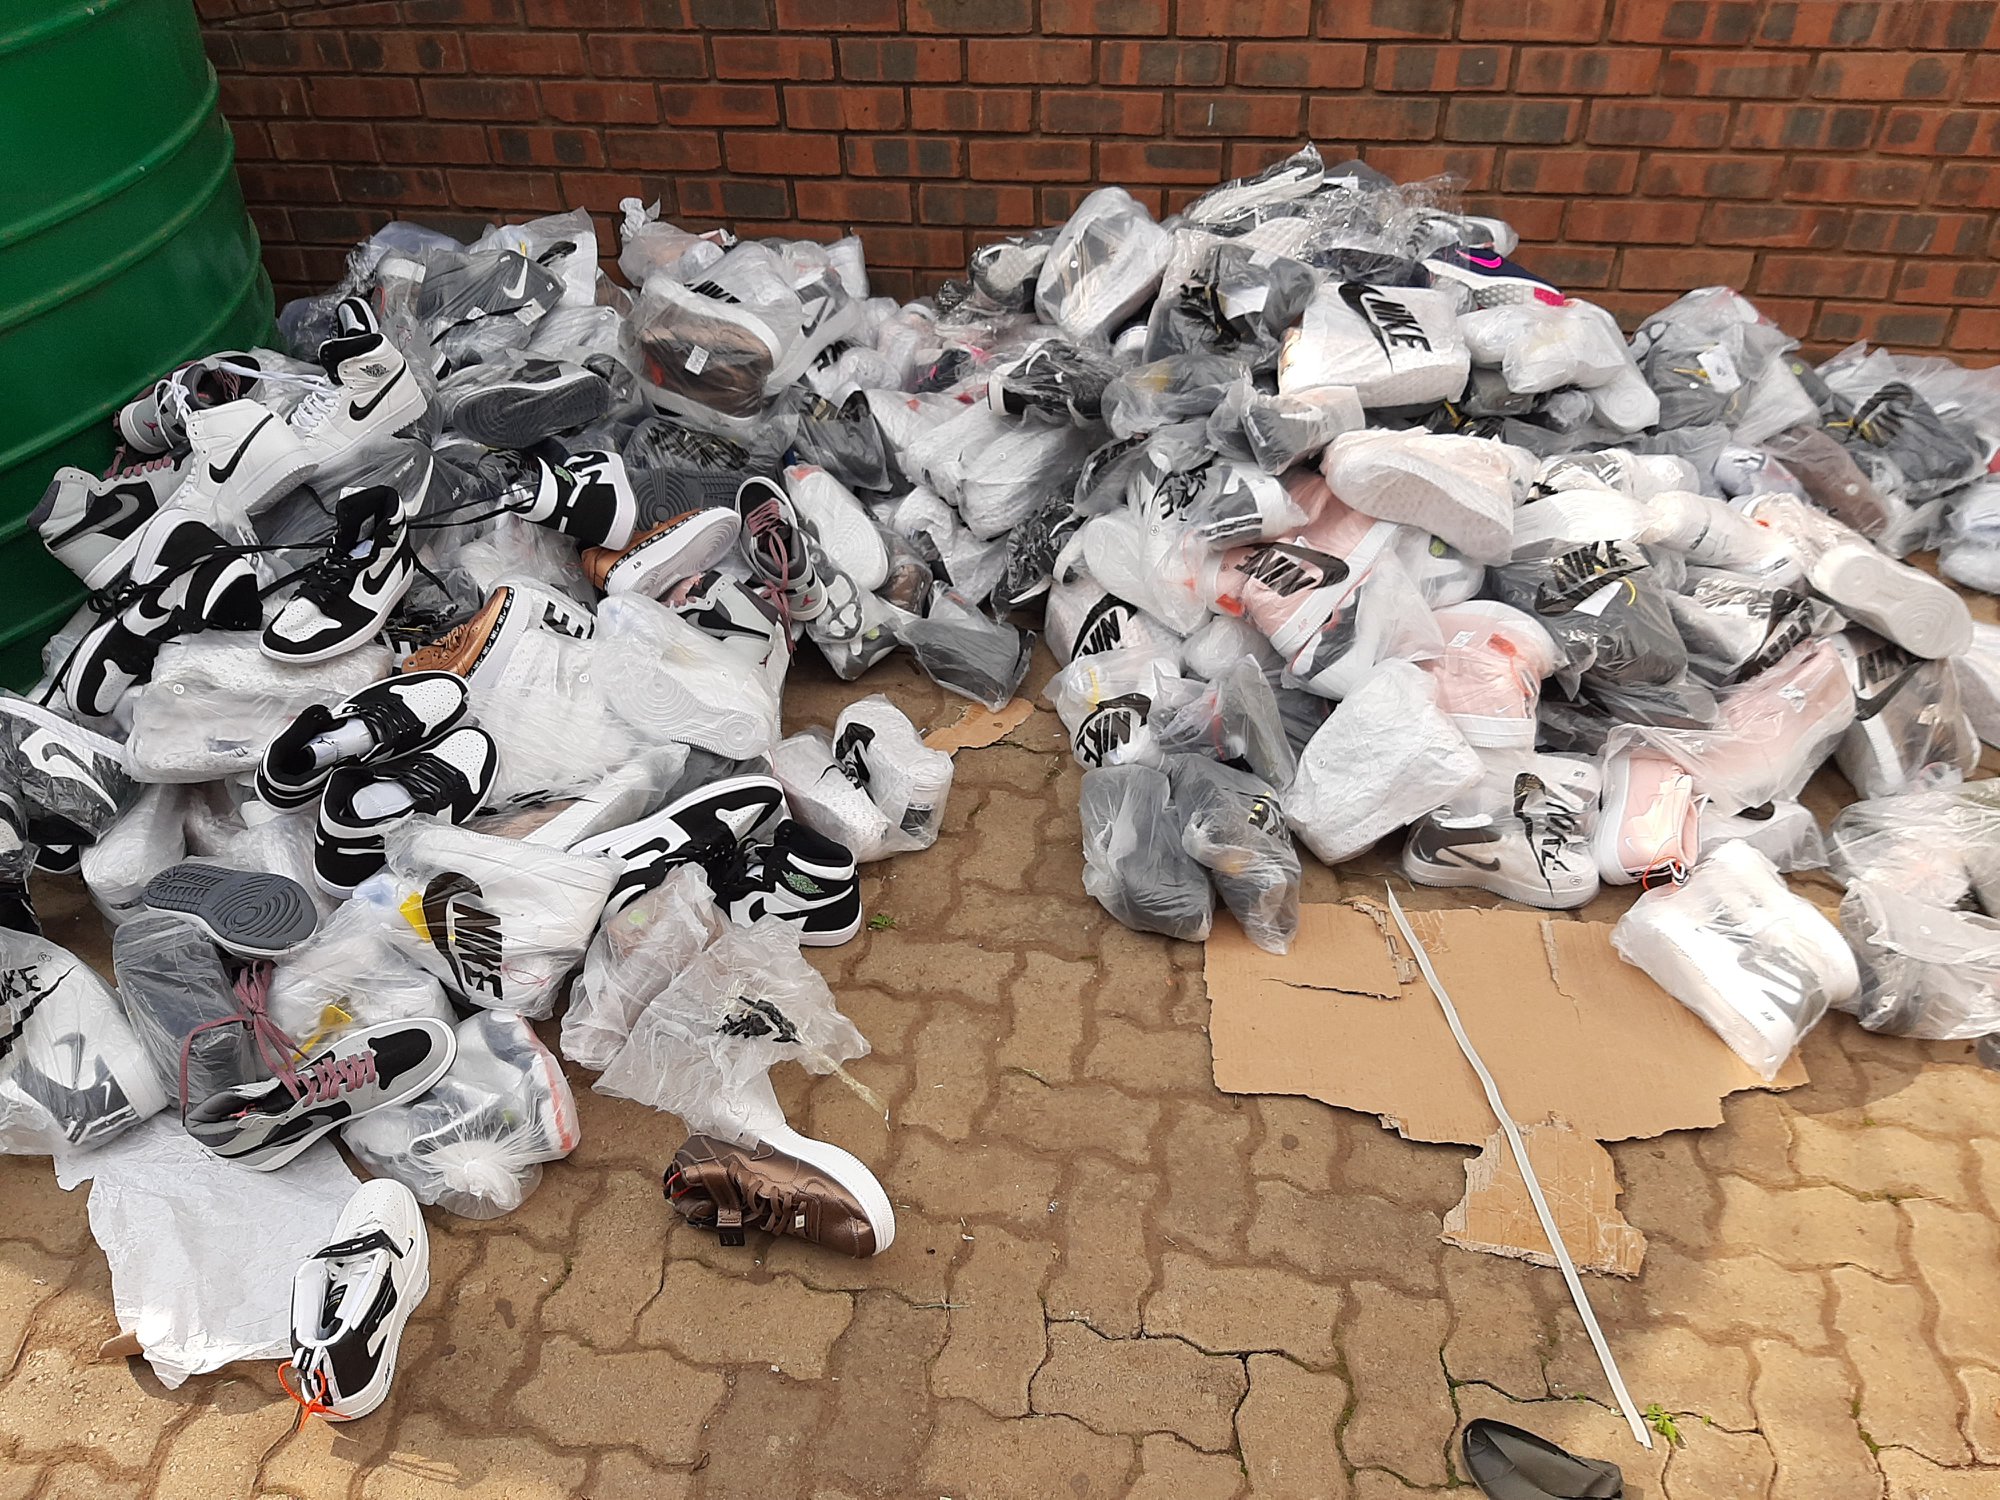 Counterfeit goods recovered, suspects arrested